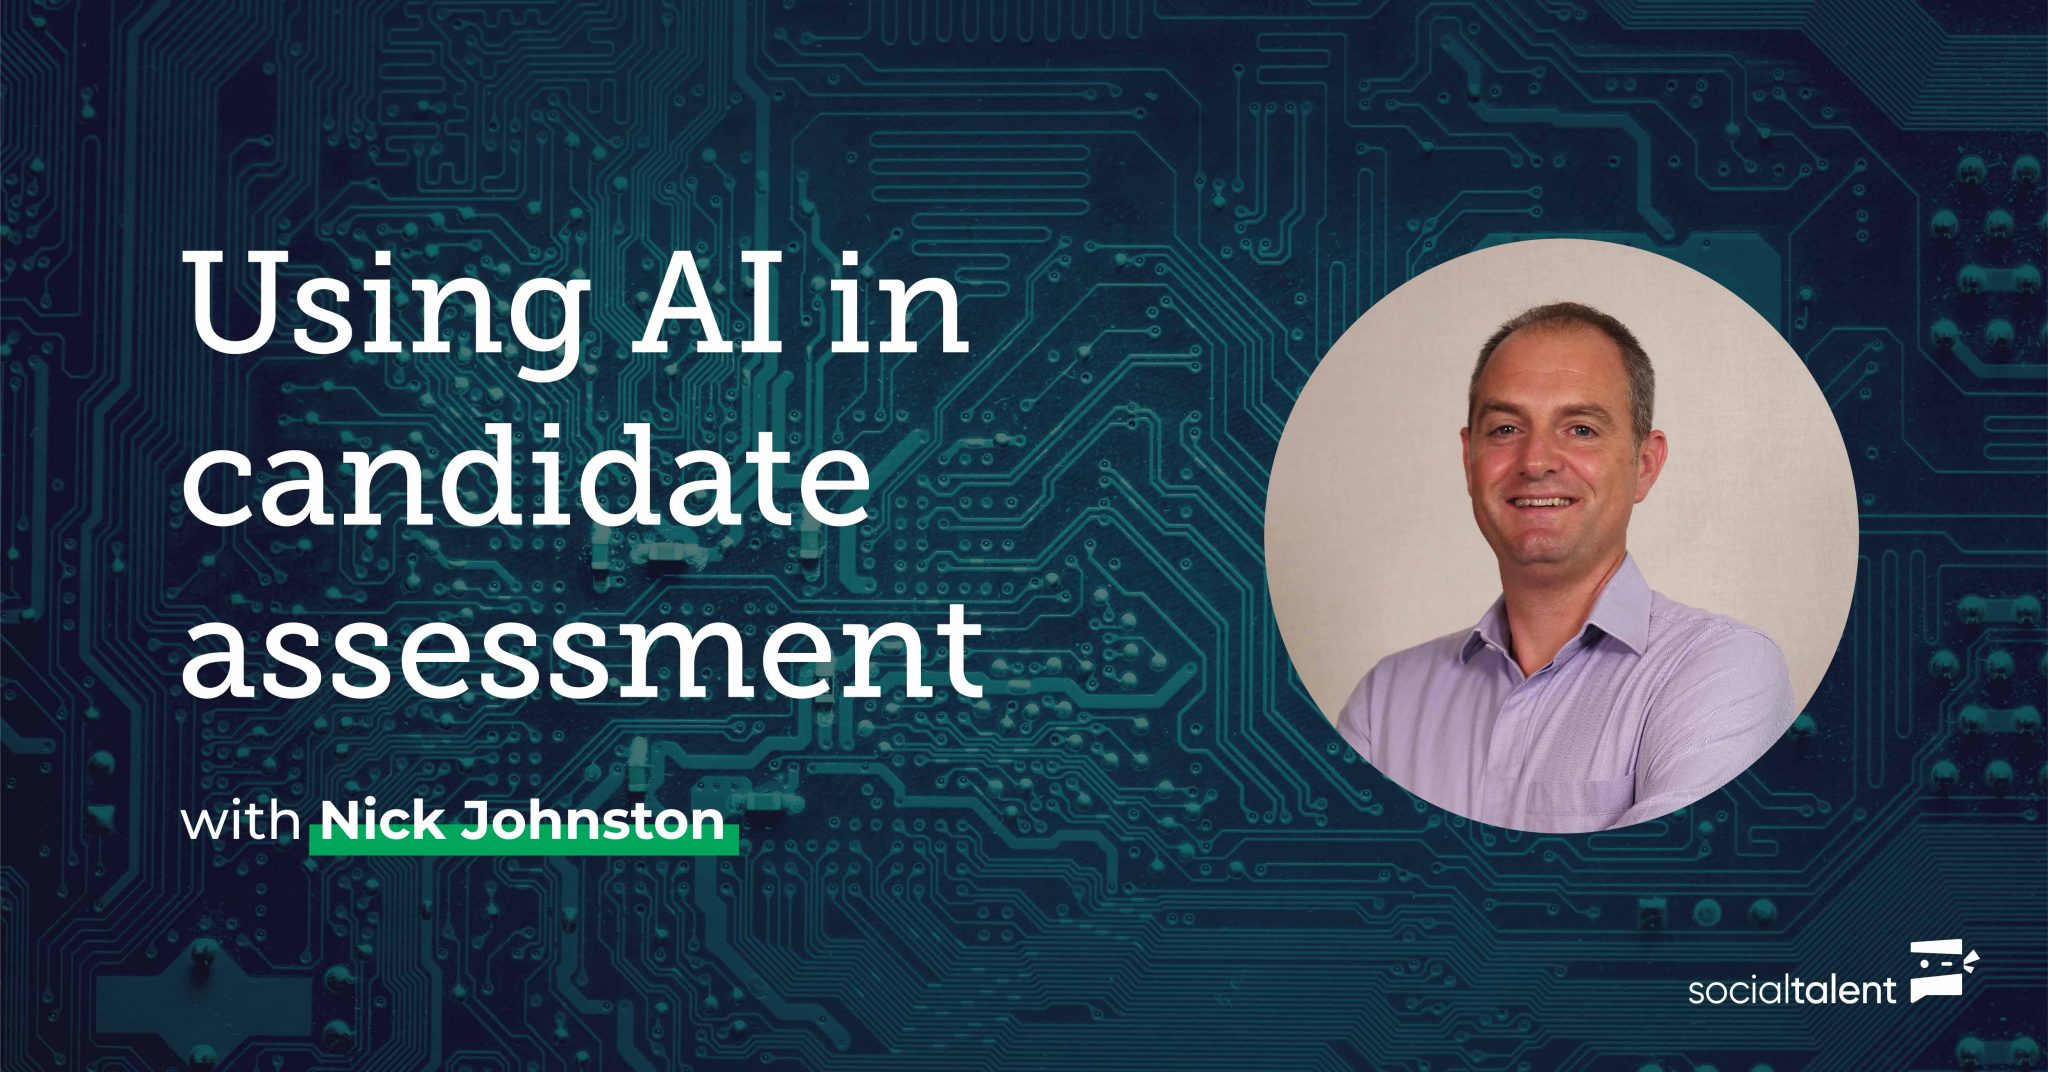 Using AI in candidate assessment, with Nick Johnston